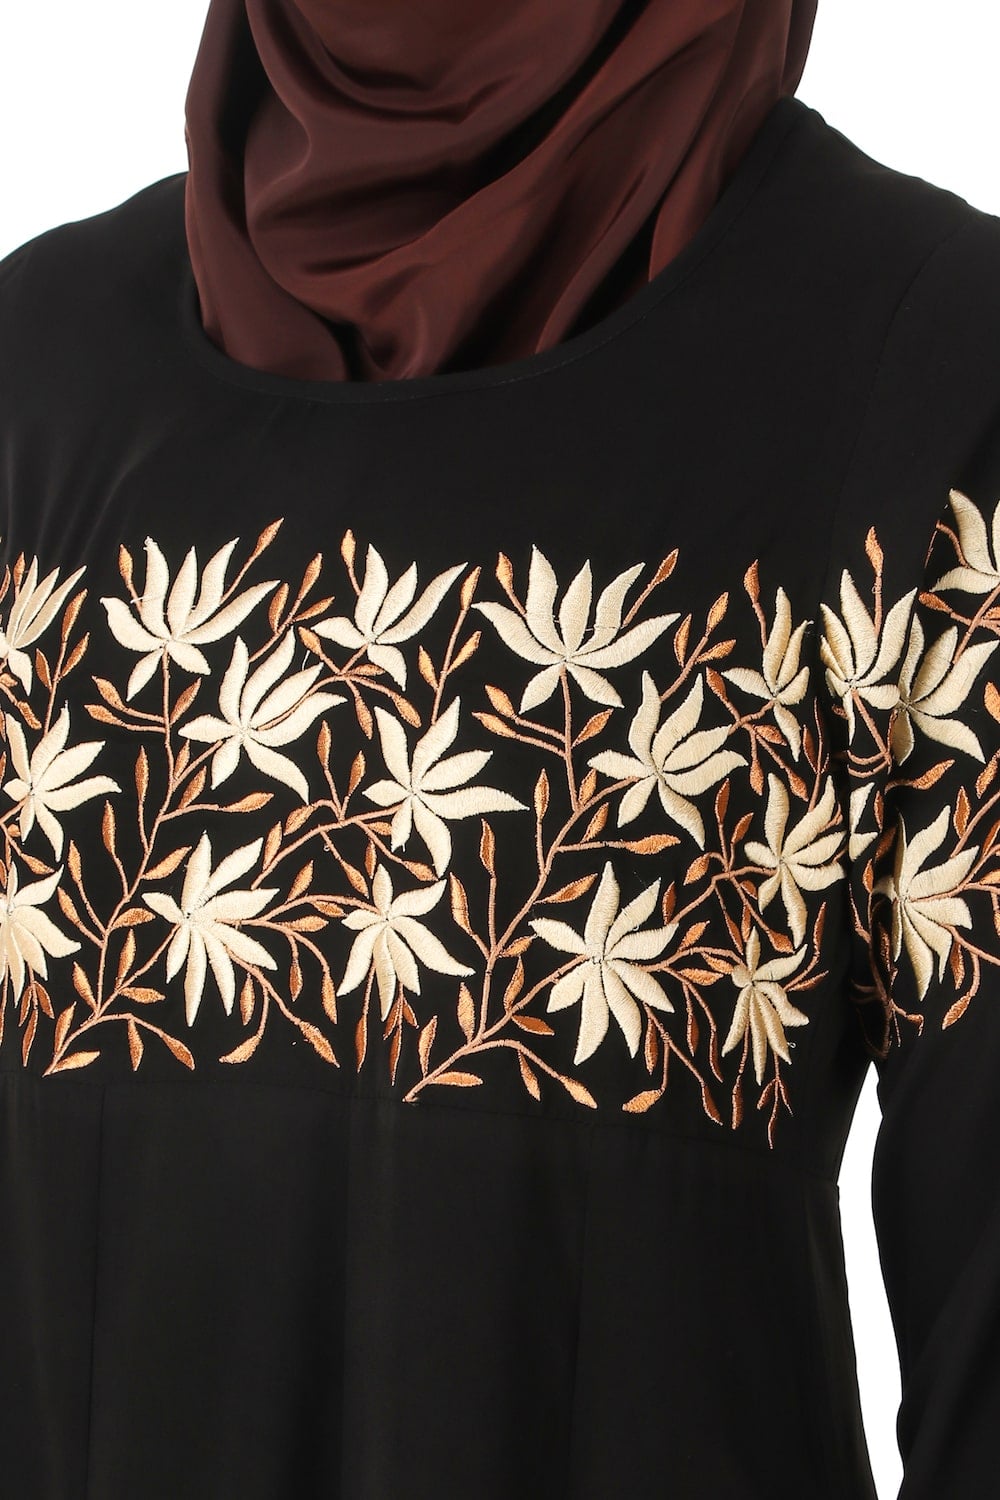 Horizontally Filled Floral Design Tunic